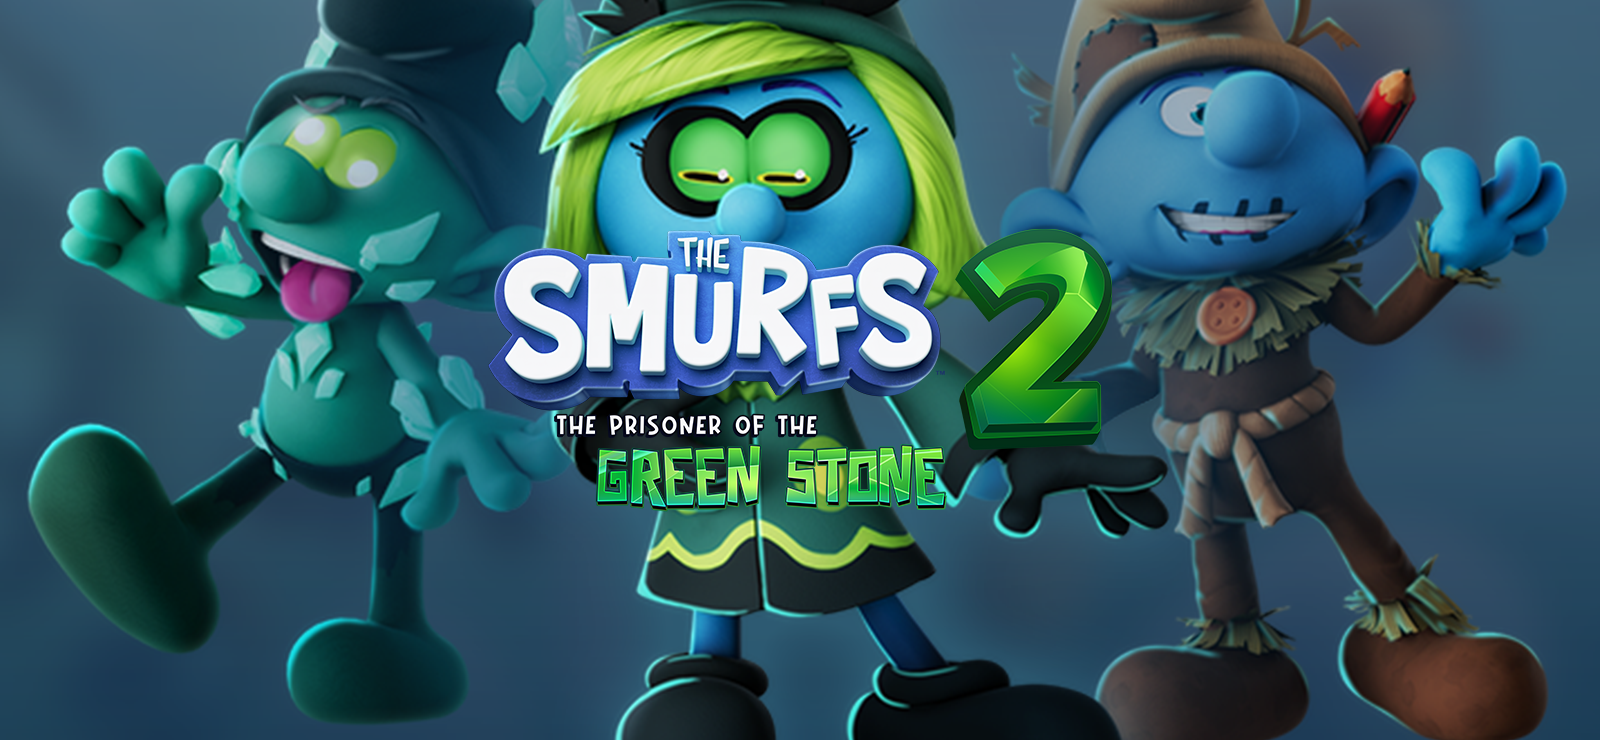 Corrupted Outfit / Farmer Outfit / Adorable Outfit - The Smurfs 2: The Prisoner Of The Green Stone